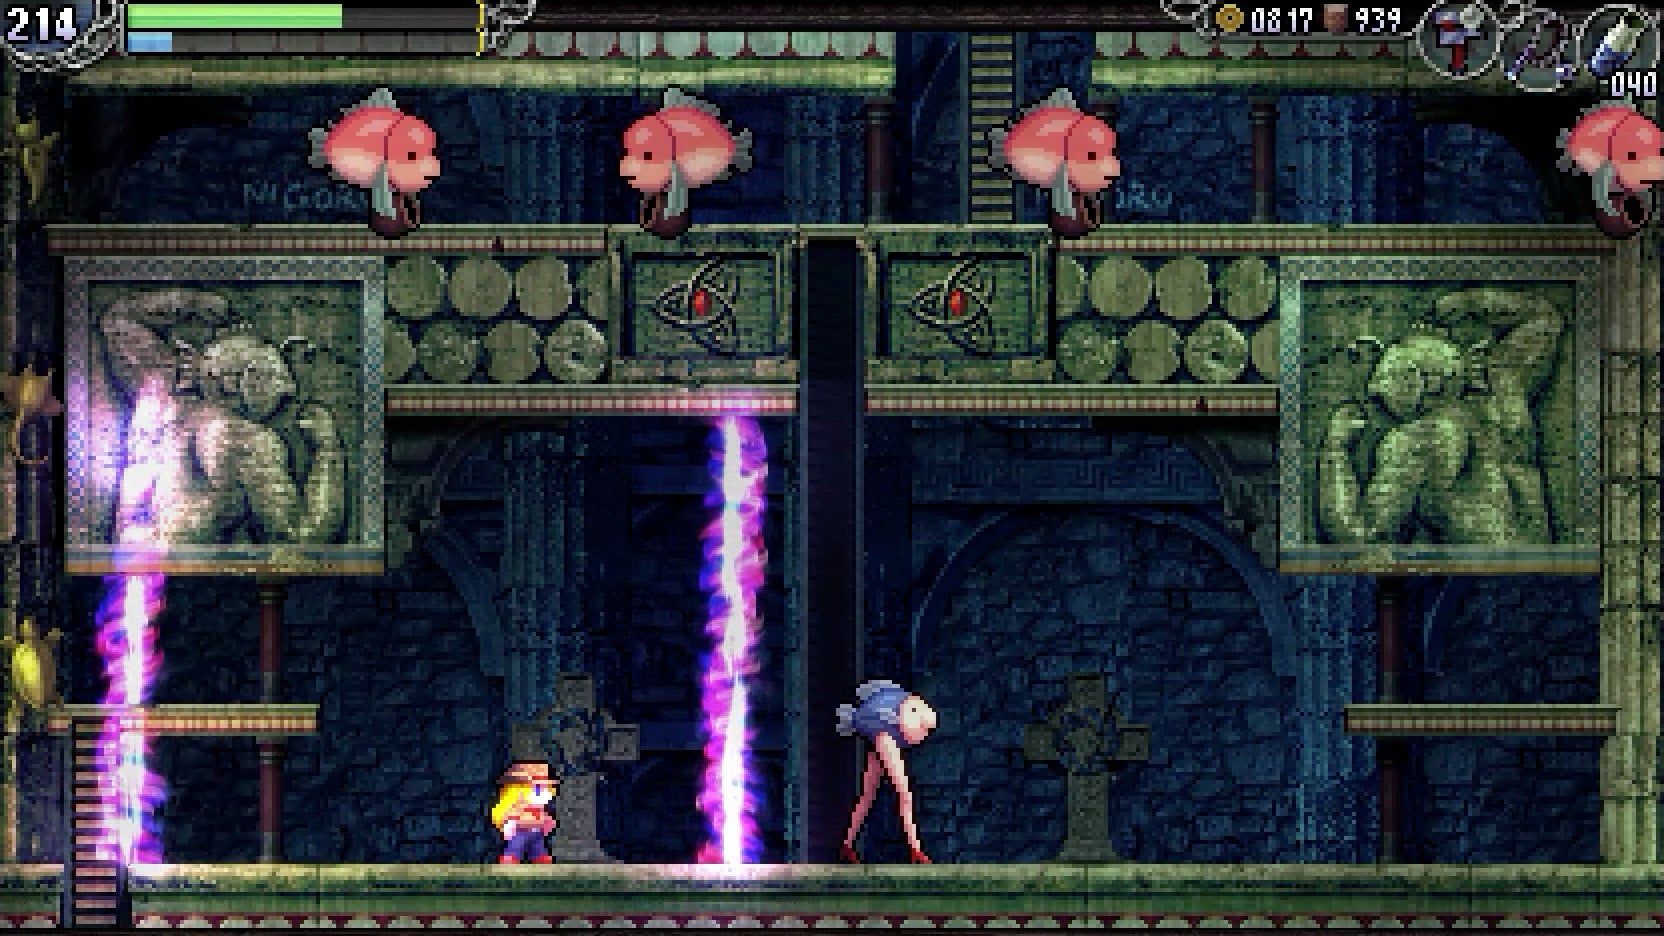 A fishy room in La-Mulana 2 -The Tower of Oannes-, including a fish walking on human legs with red high heels.